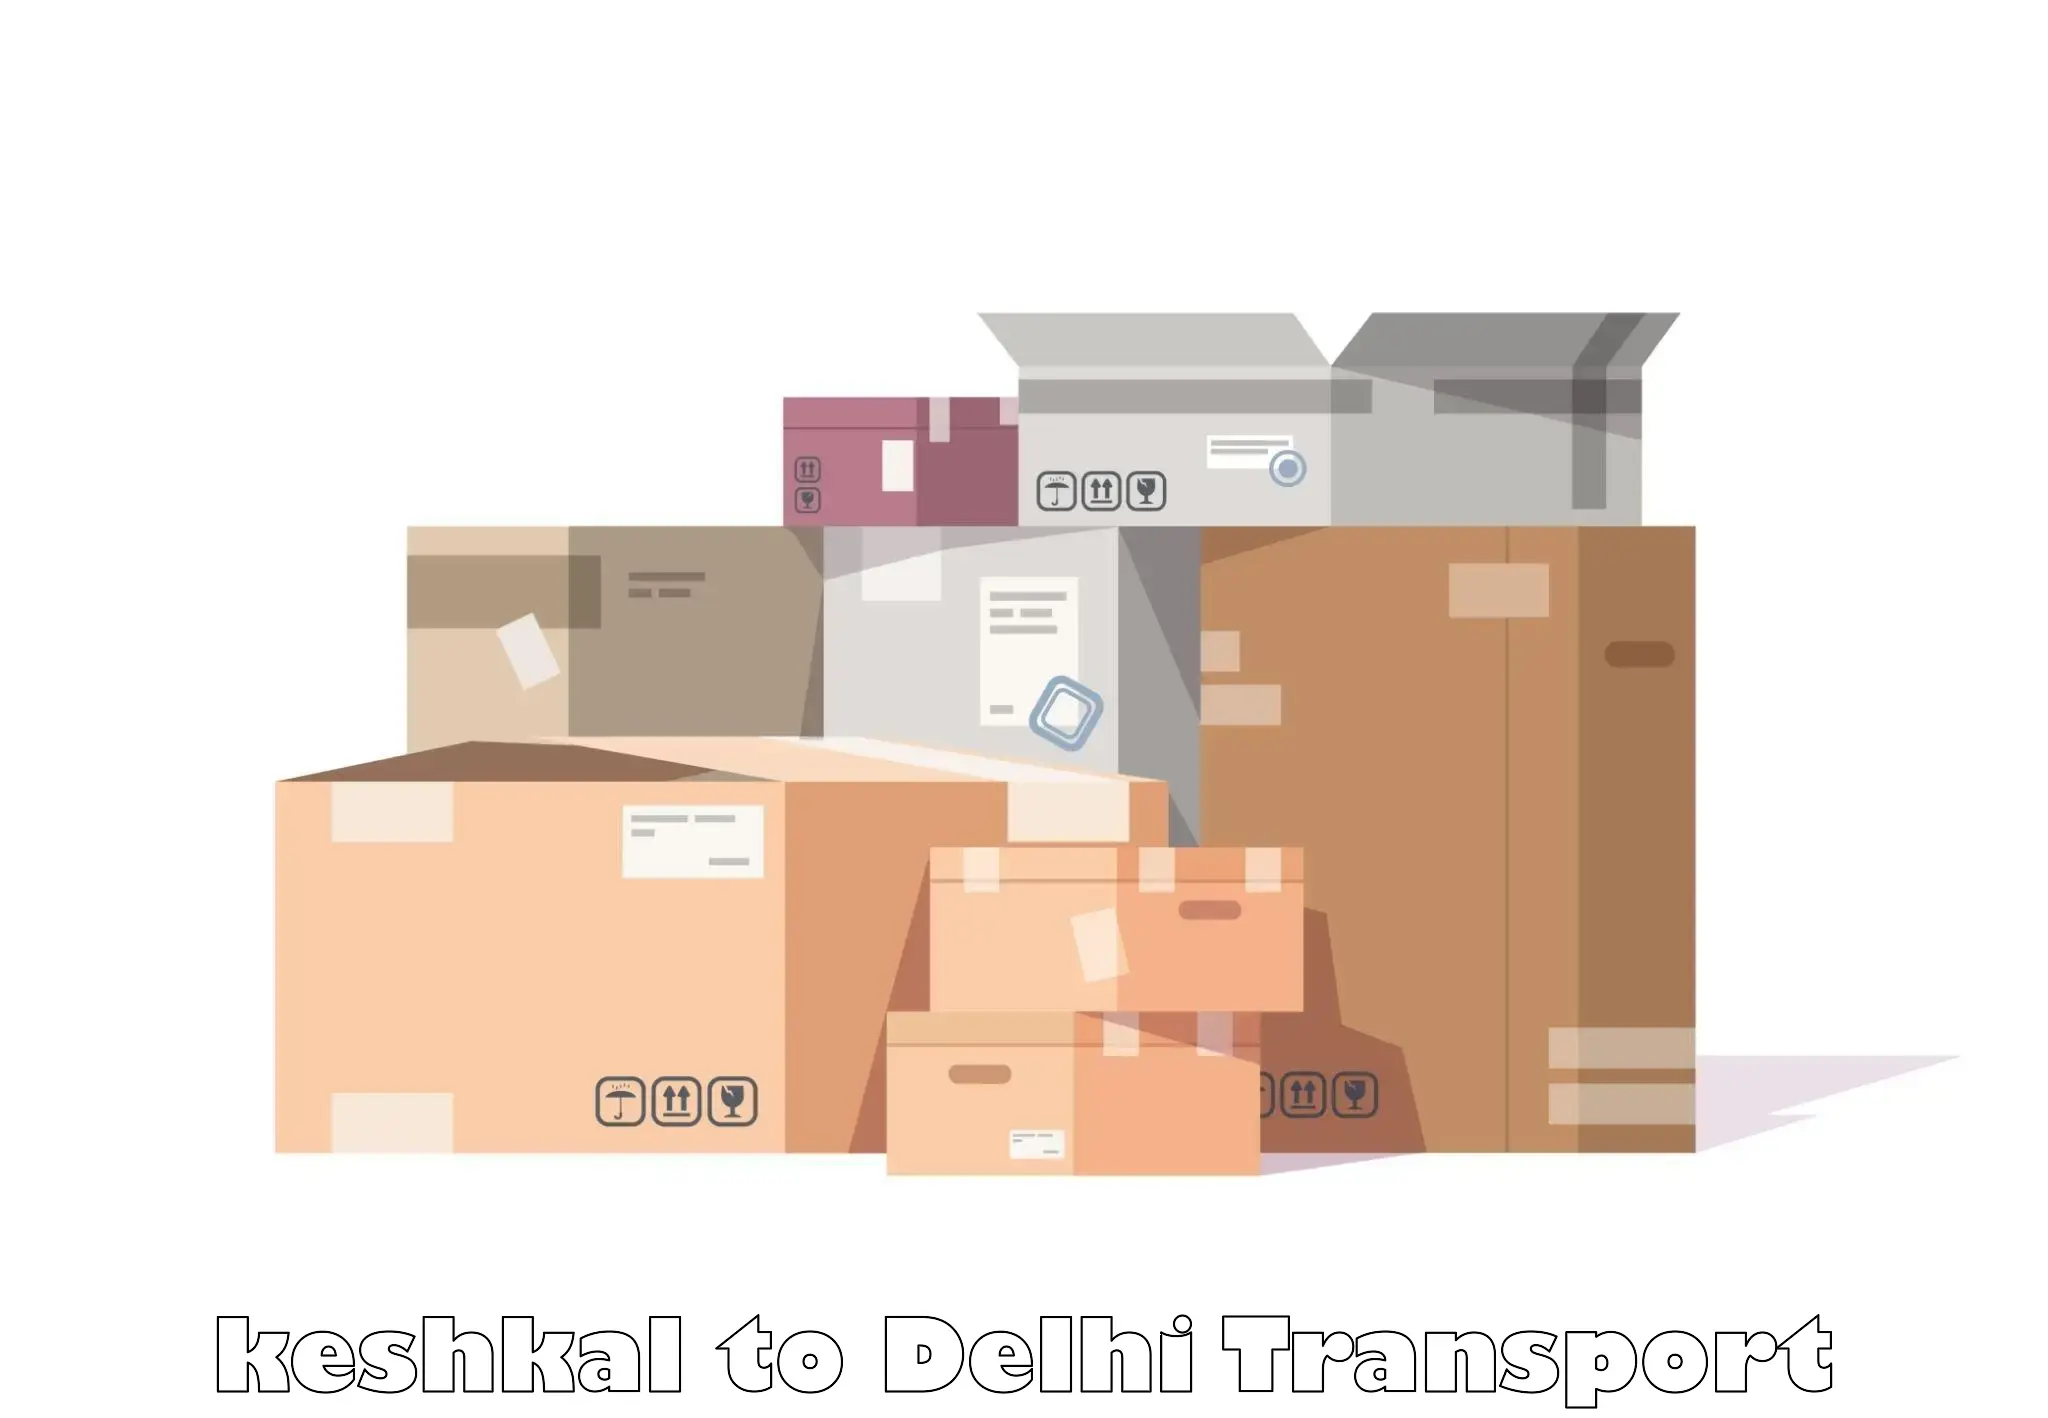 Nearby transport service keshkal to NCR